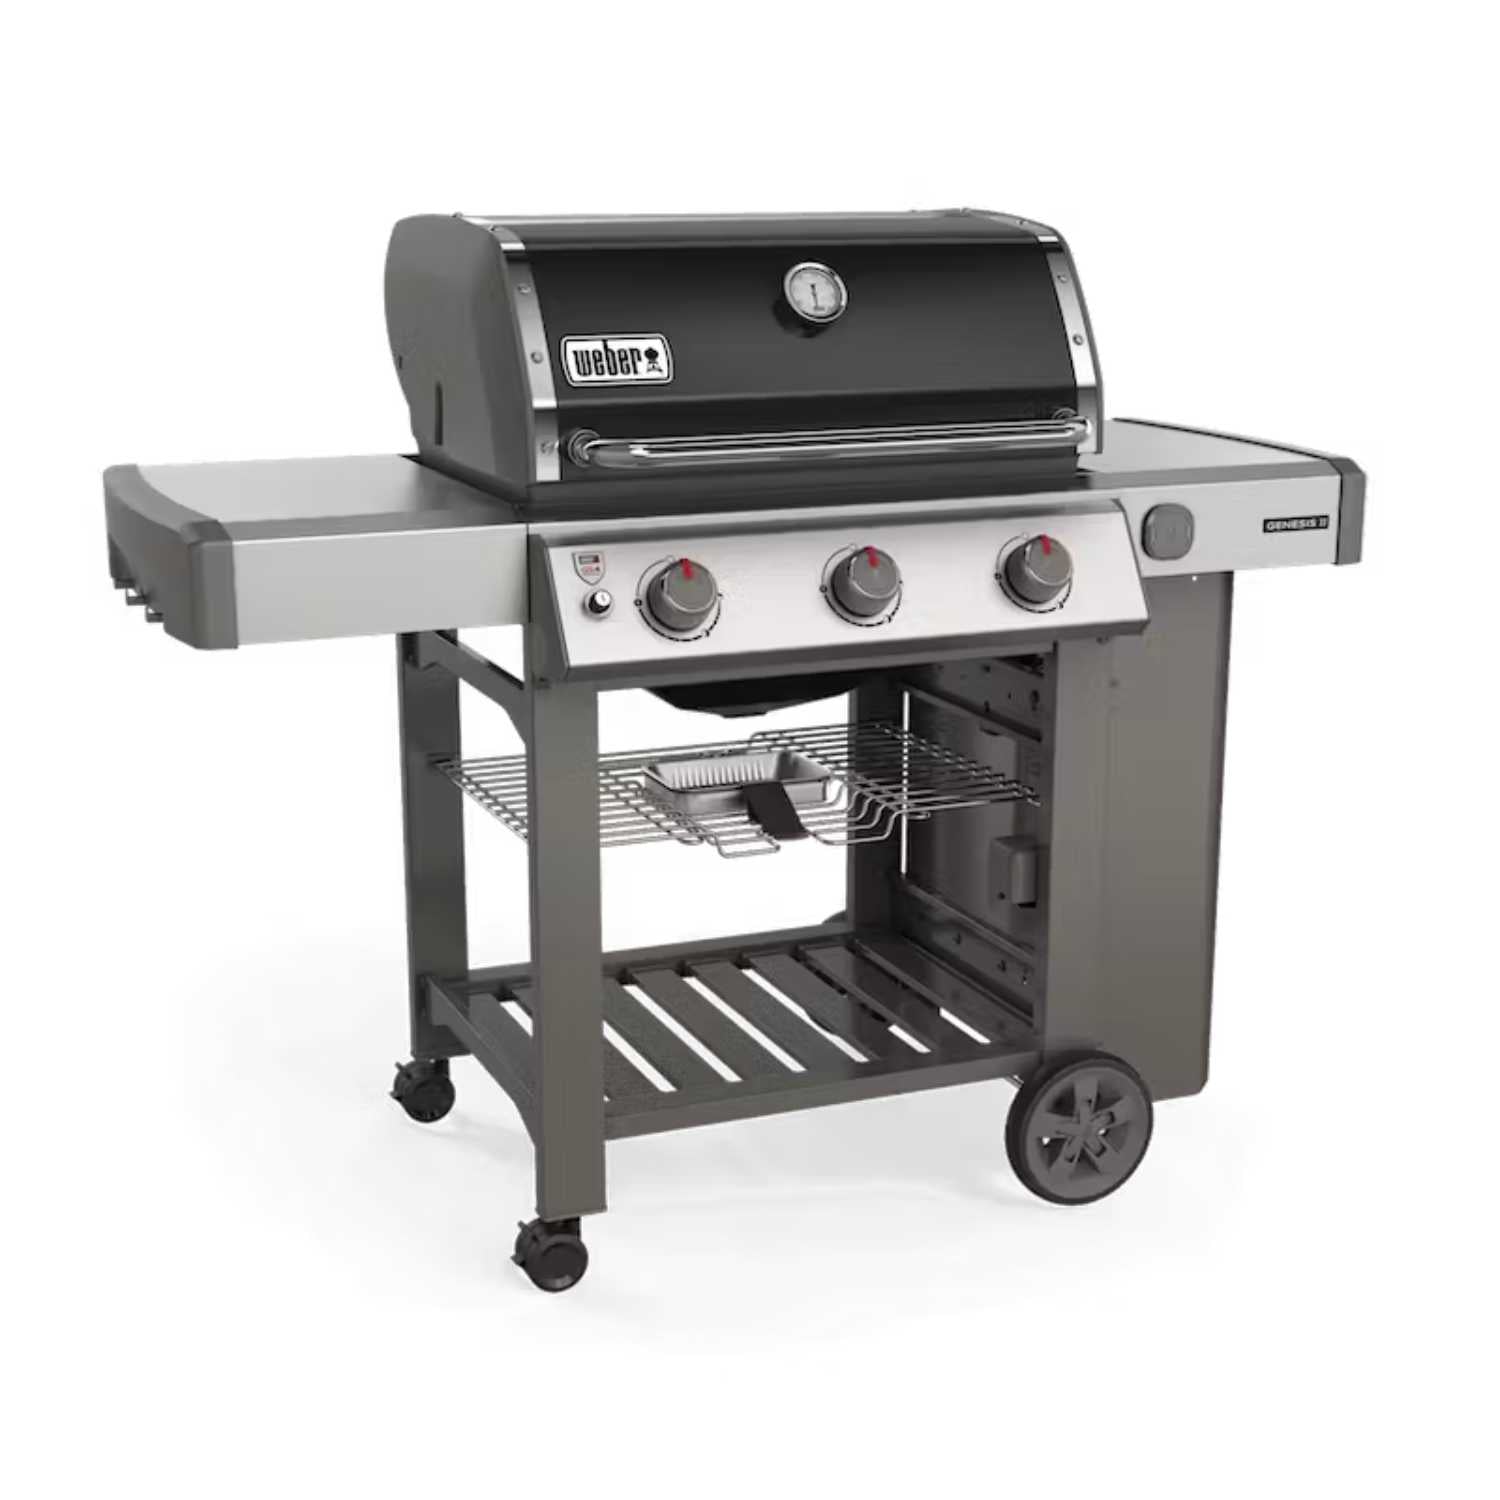 Weber Genesis II E-310 Grill perfect for outdoor barbecues available at MeatKing.hk0